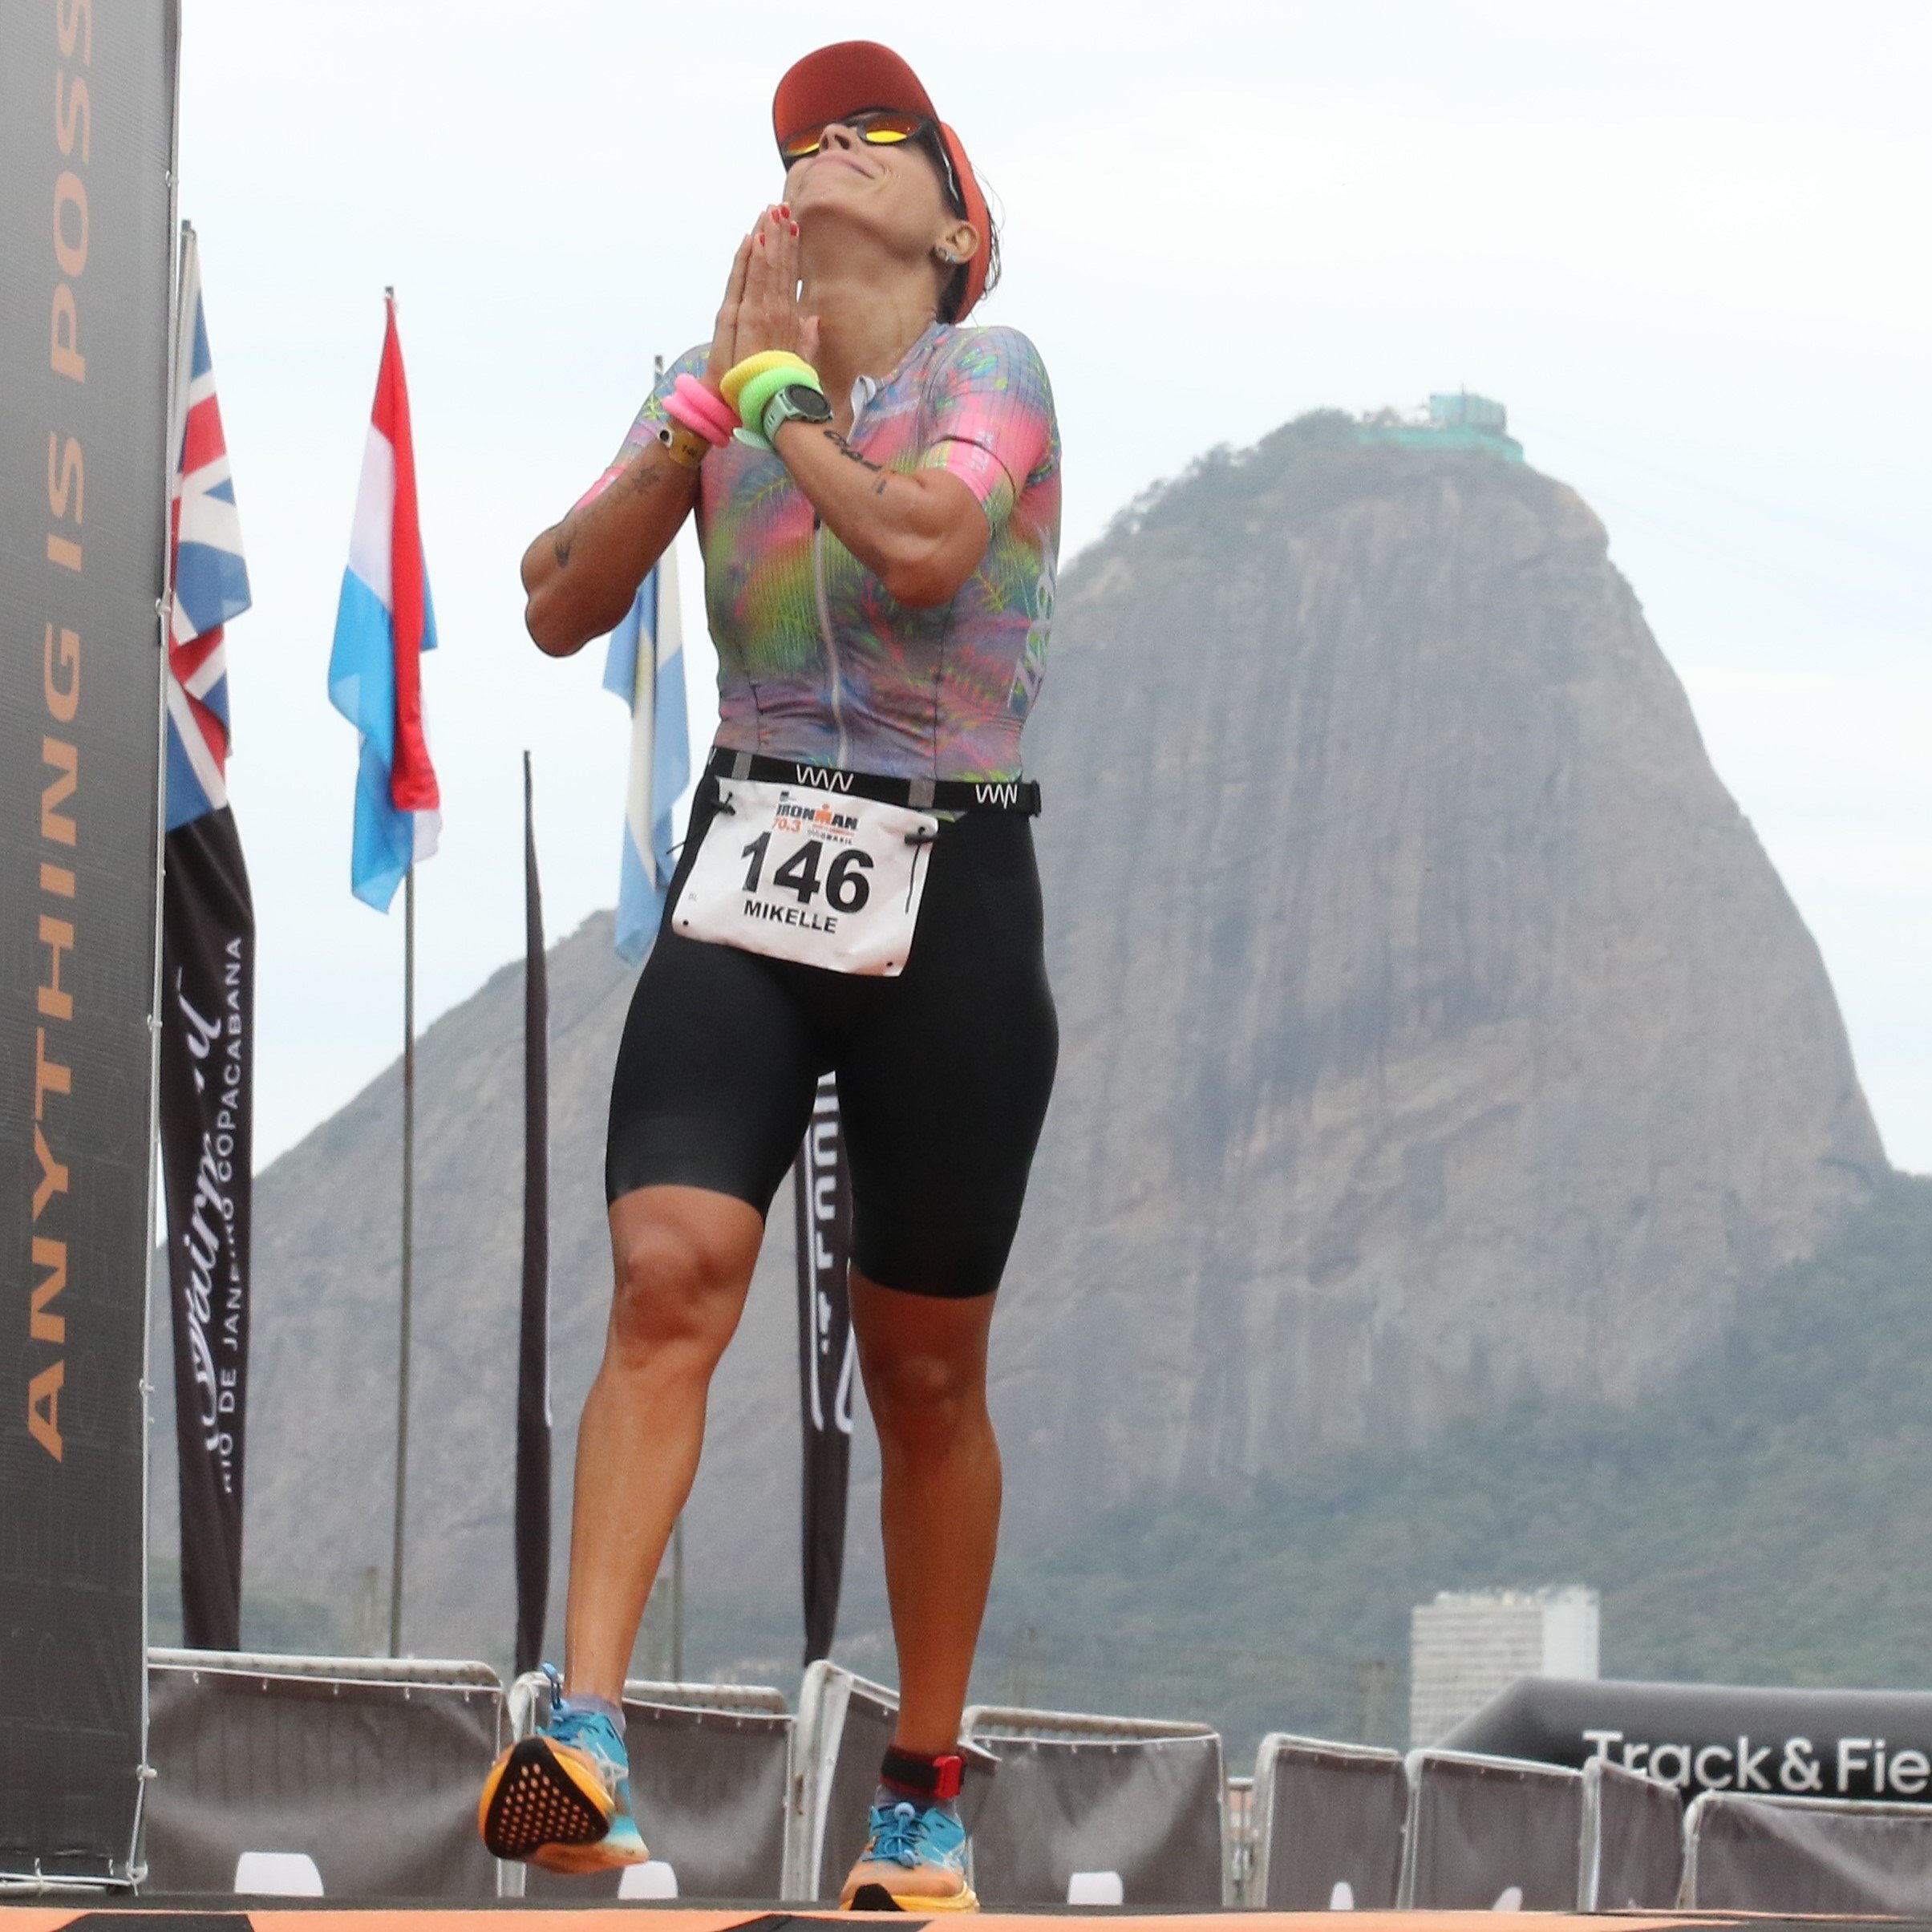 IRONMAN Brazil - Anything is Possible